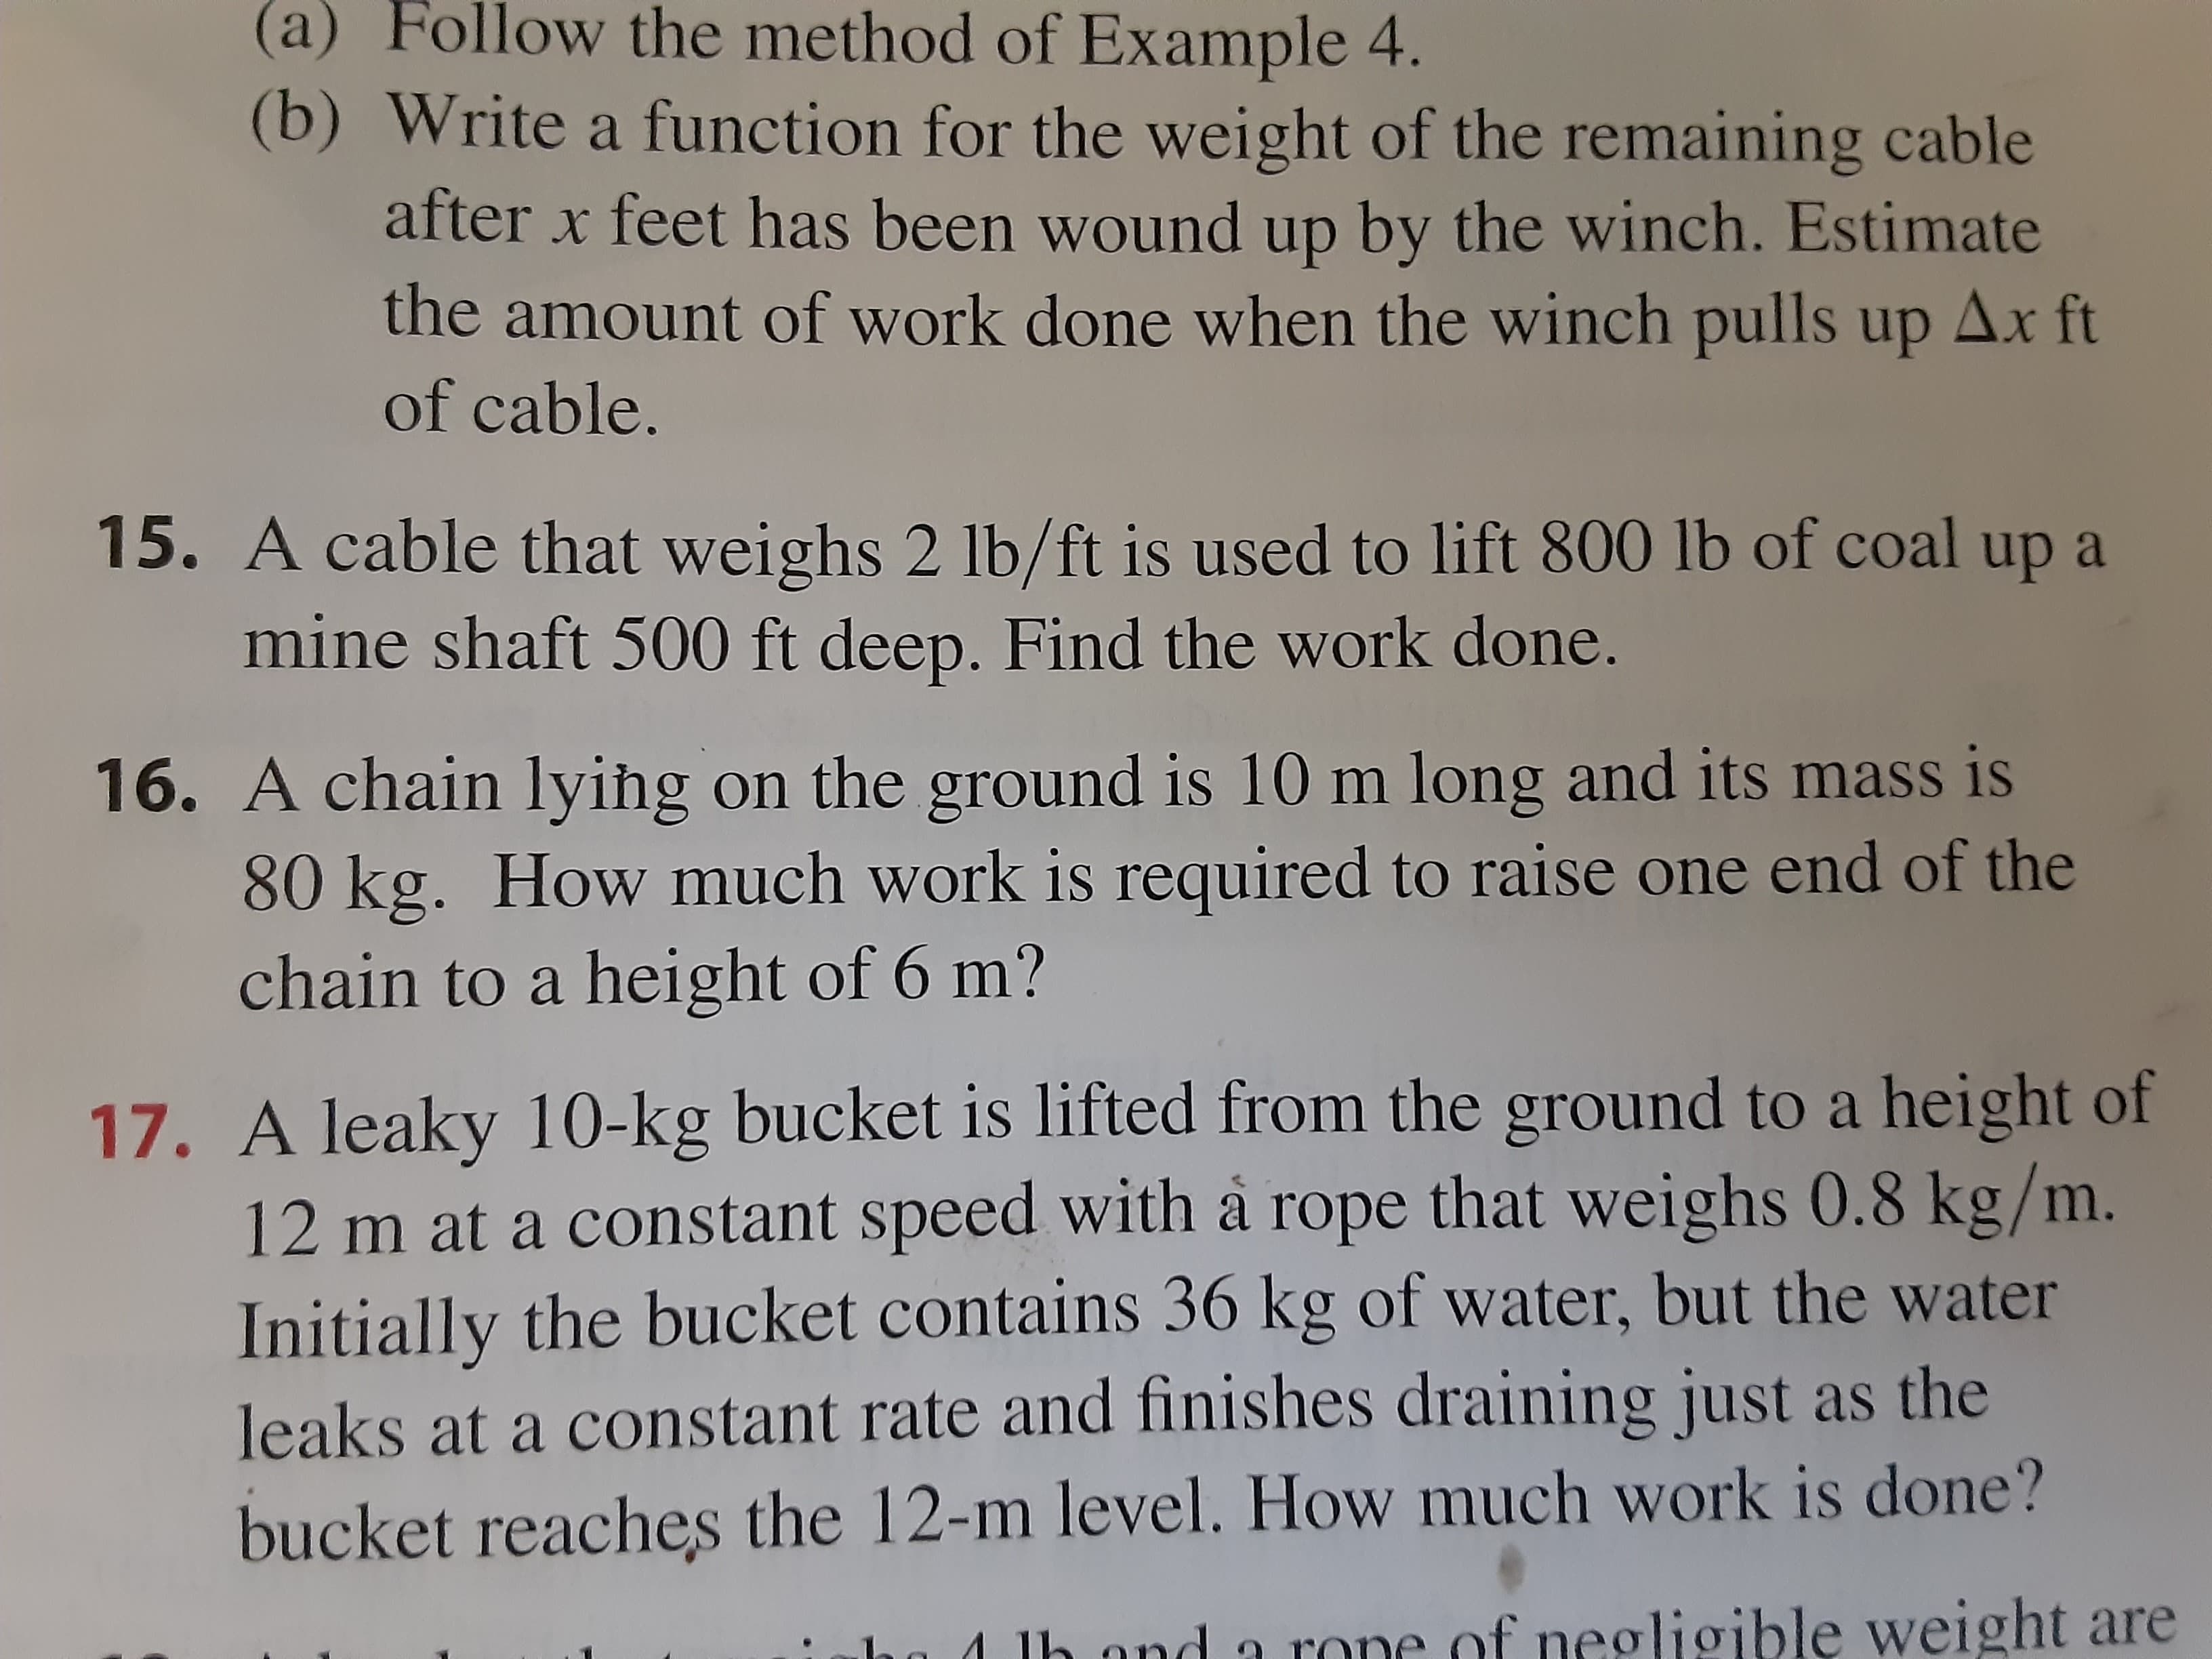 16. A chain lying on the ground is 10 m long and its mass is
80 kg. How much work is required to raise one end of the
chain to a height of 6 m?
